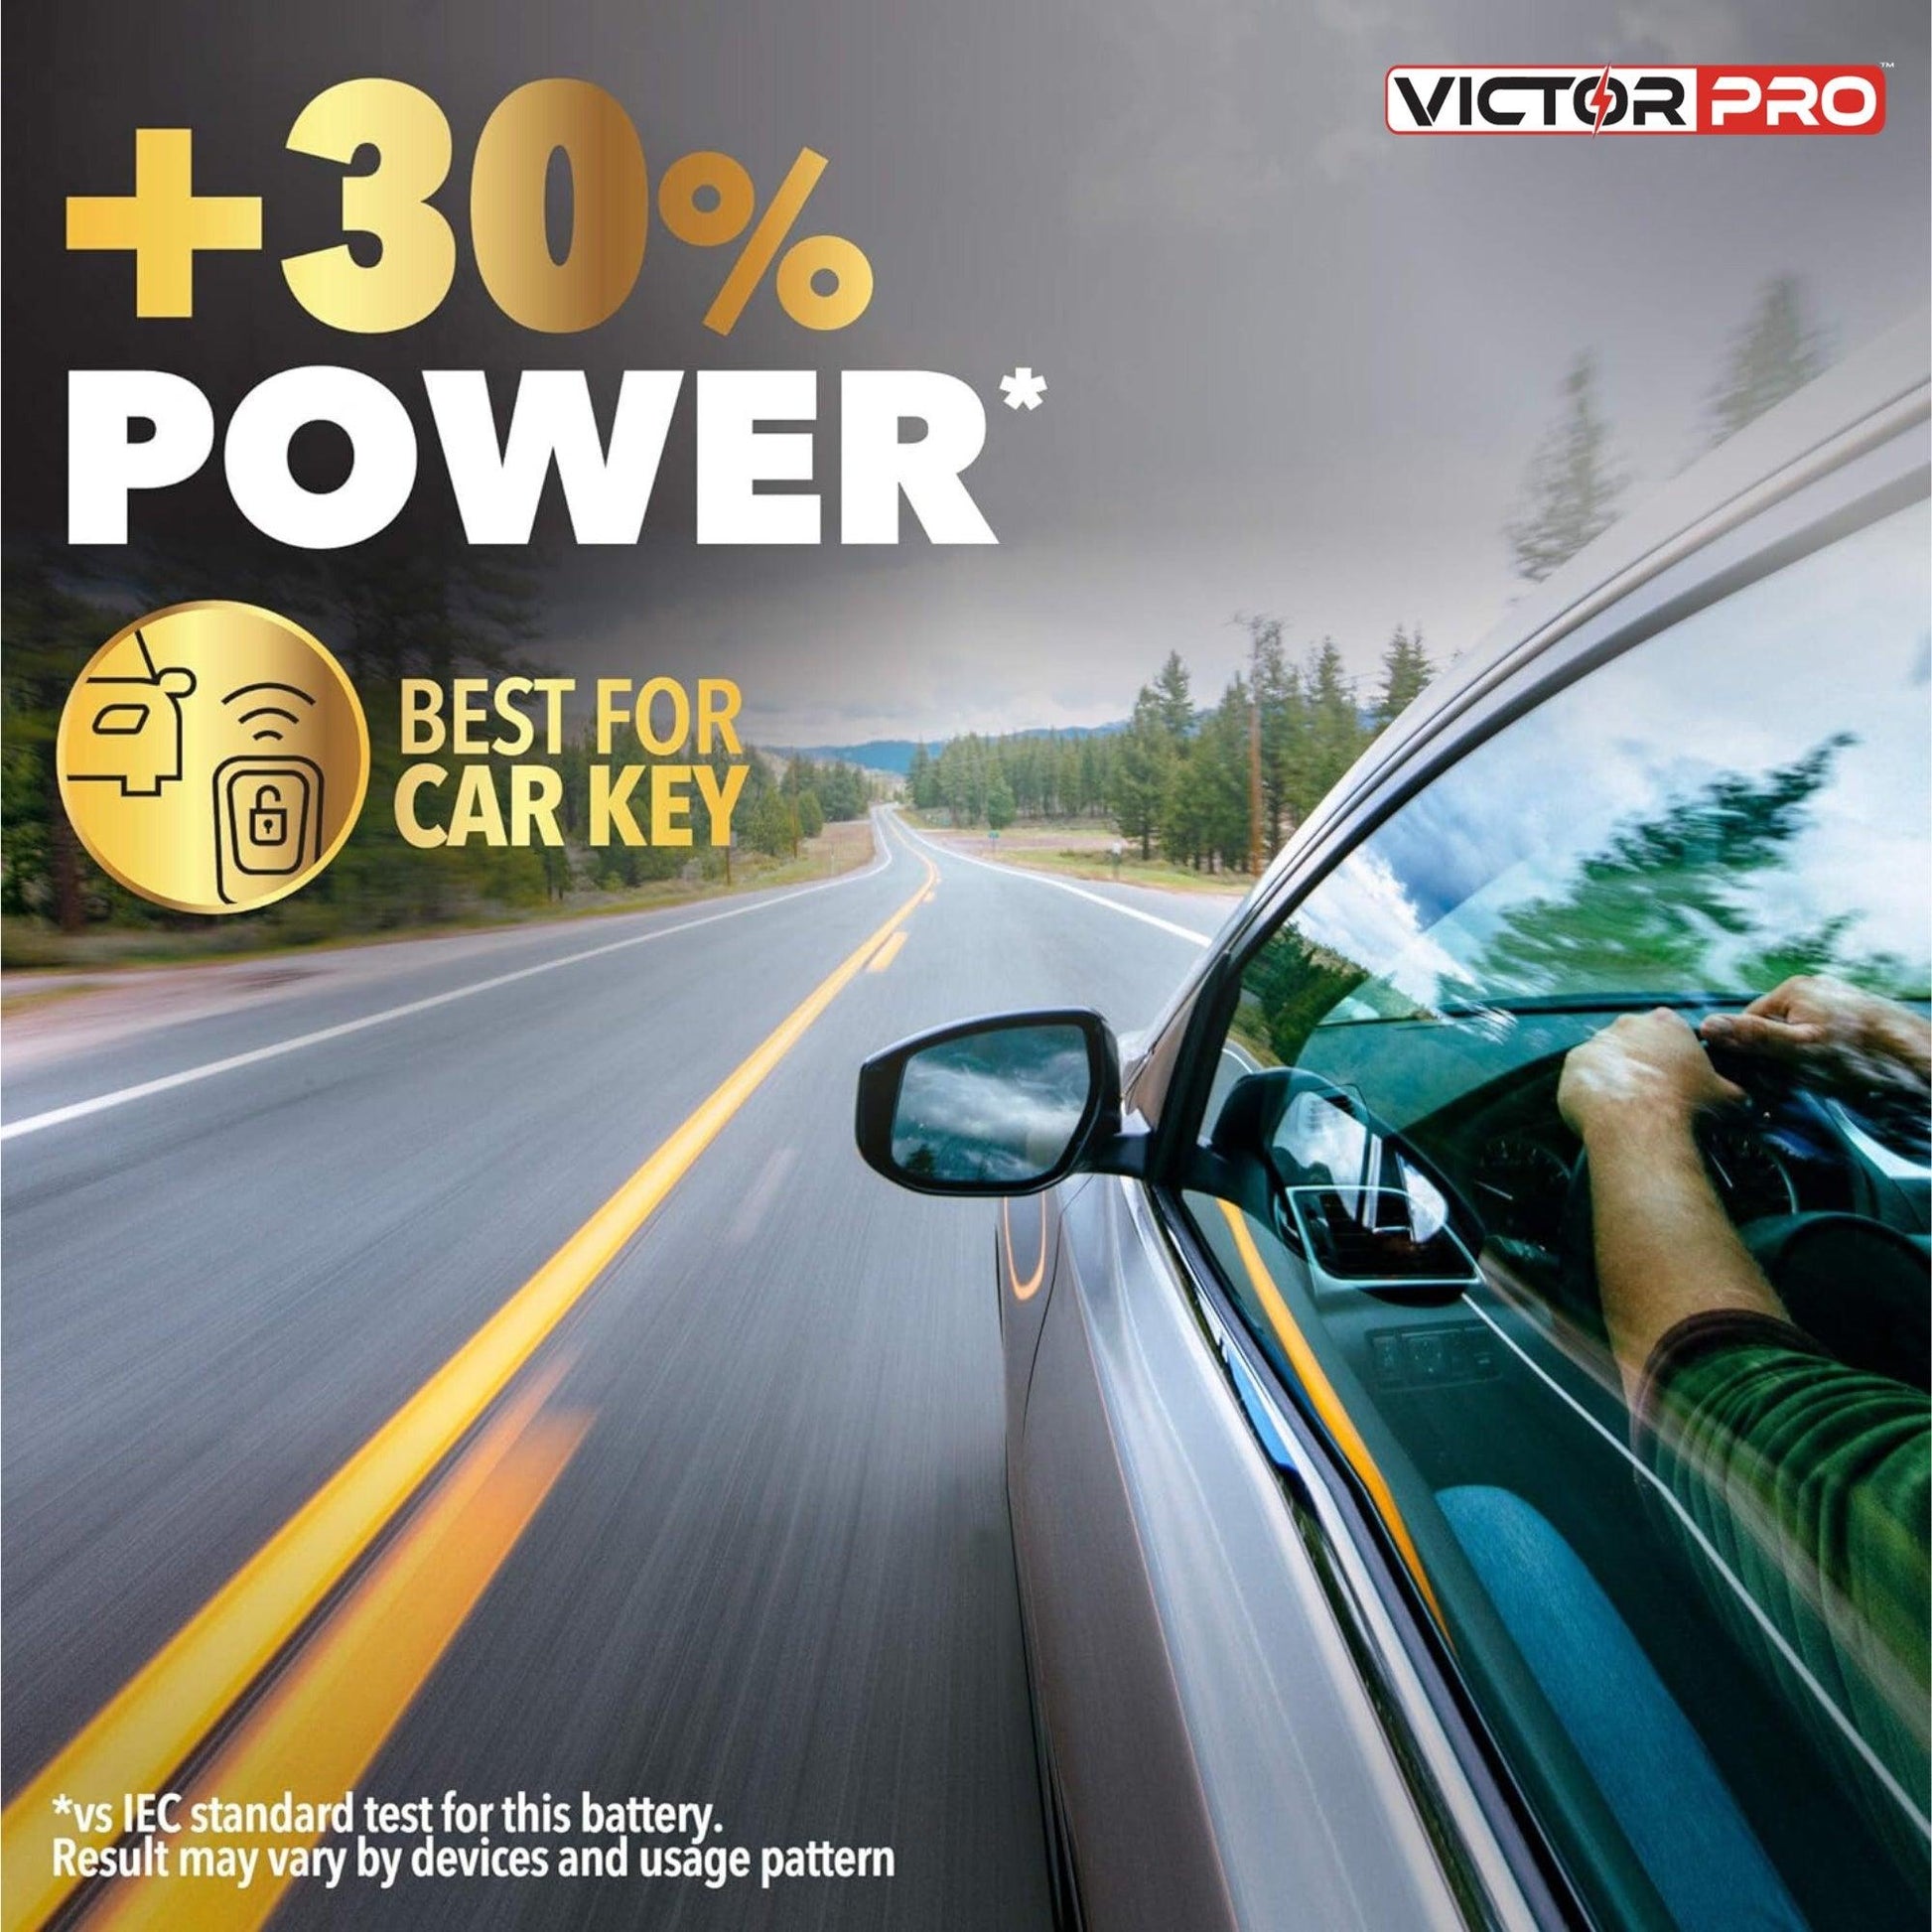 VictorPro CR2025 3V LITHIUM COIN BATTERY - HIGH PERFORMANCE GUARANTEED - VictorPro